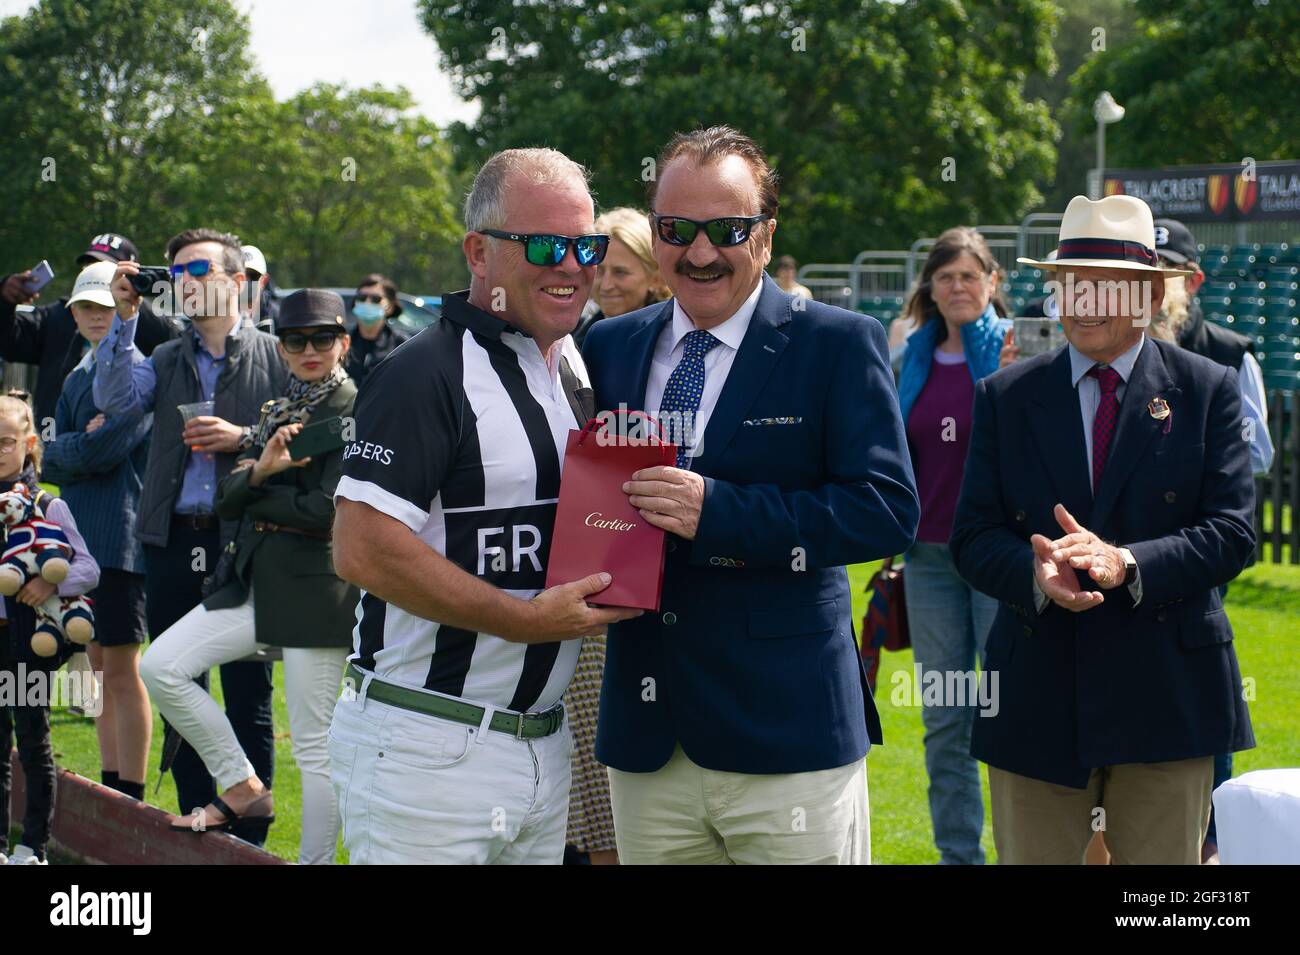 Egham, Surrey, UK. 23rd August, 2021. Umpire Tim Brown is presented with a Cartier gift by John Collins, CEO and Founder of Talacrest after the Talacrest Prince of Wales's Championship Cup Sub-Final. Bardon Polo Team beat the UAE Polo Team. Credit: Maureen McLean/Alamy Stock Photo